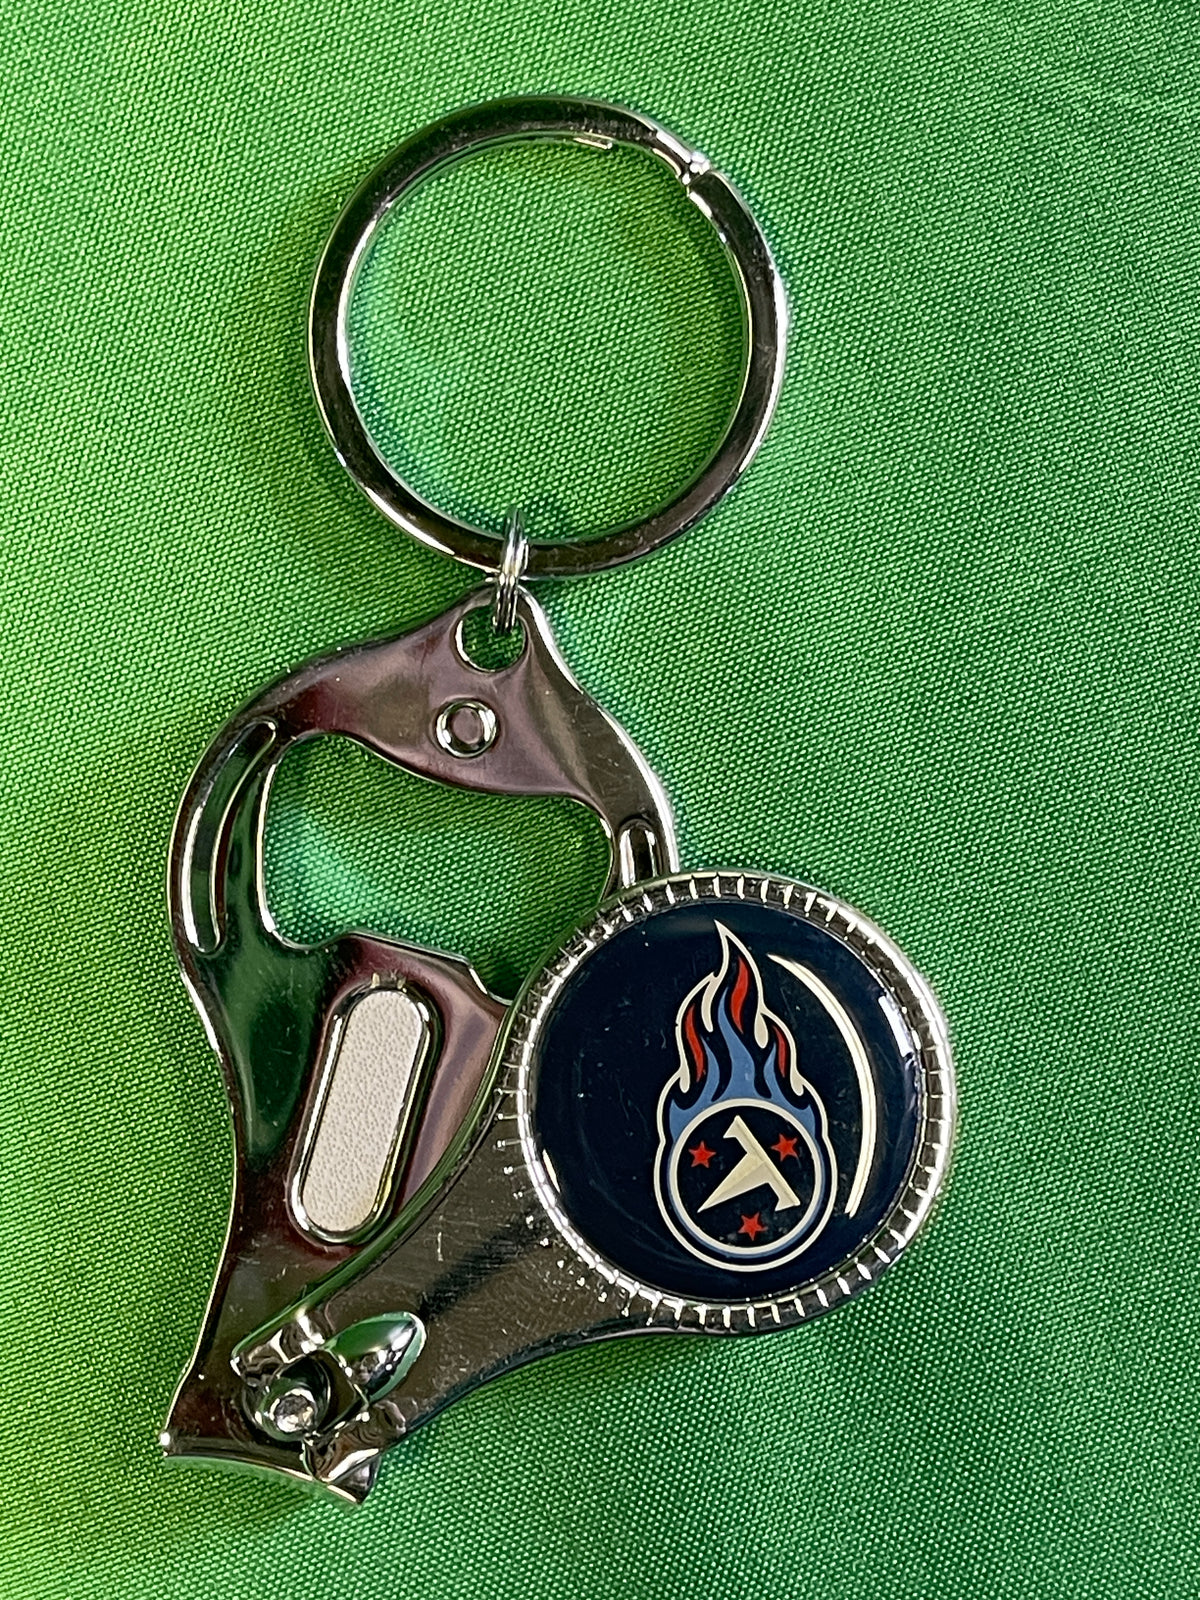 NFL Tennessee Titans 3-in-1 Keychain Opener Nail Clippers NWT